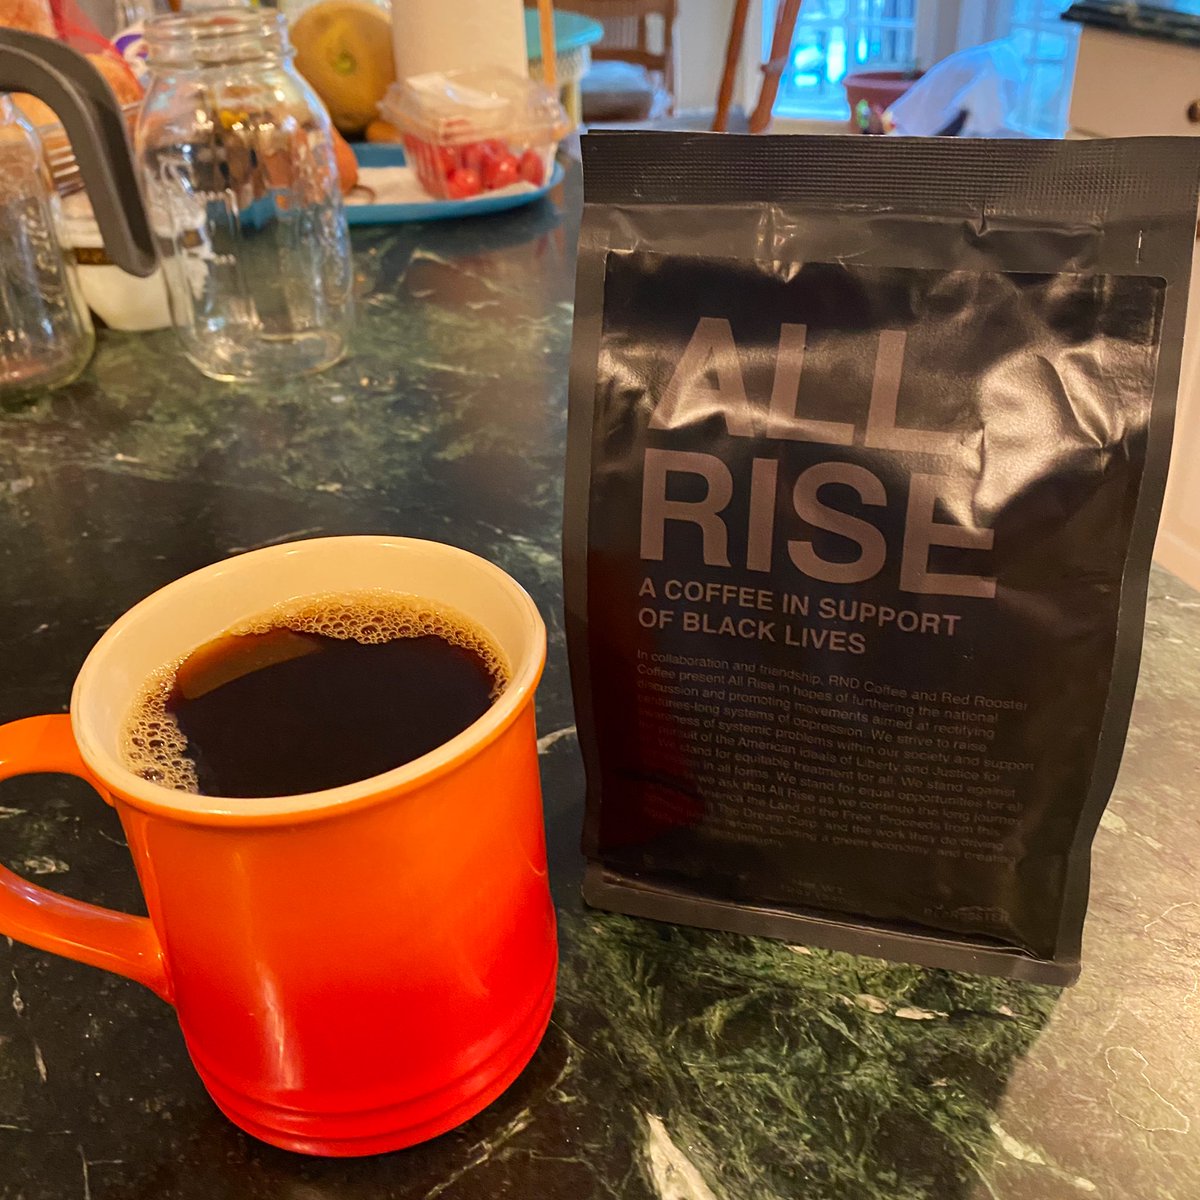 Red Rooster Coffee All RiseReally wonderful to see so many coffee roasters (and brewers as well) supporting Black Lives Matter. And this one was an especially fantastic blend.